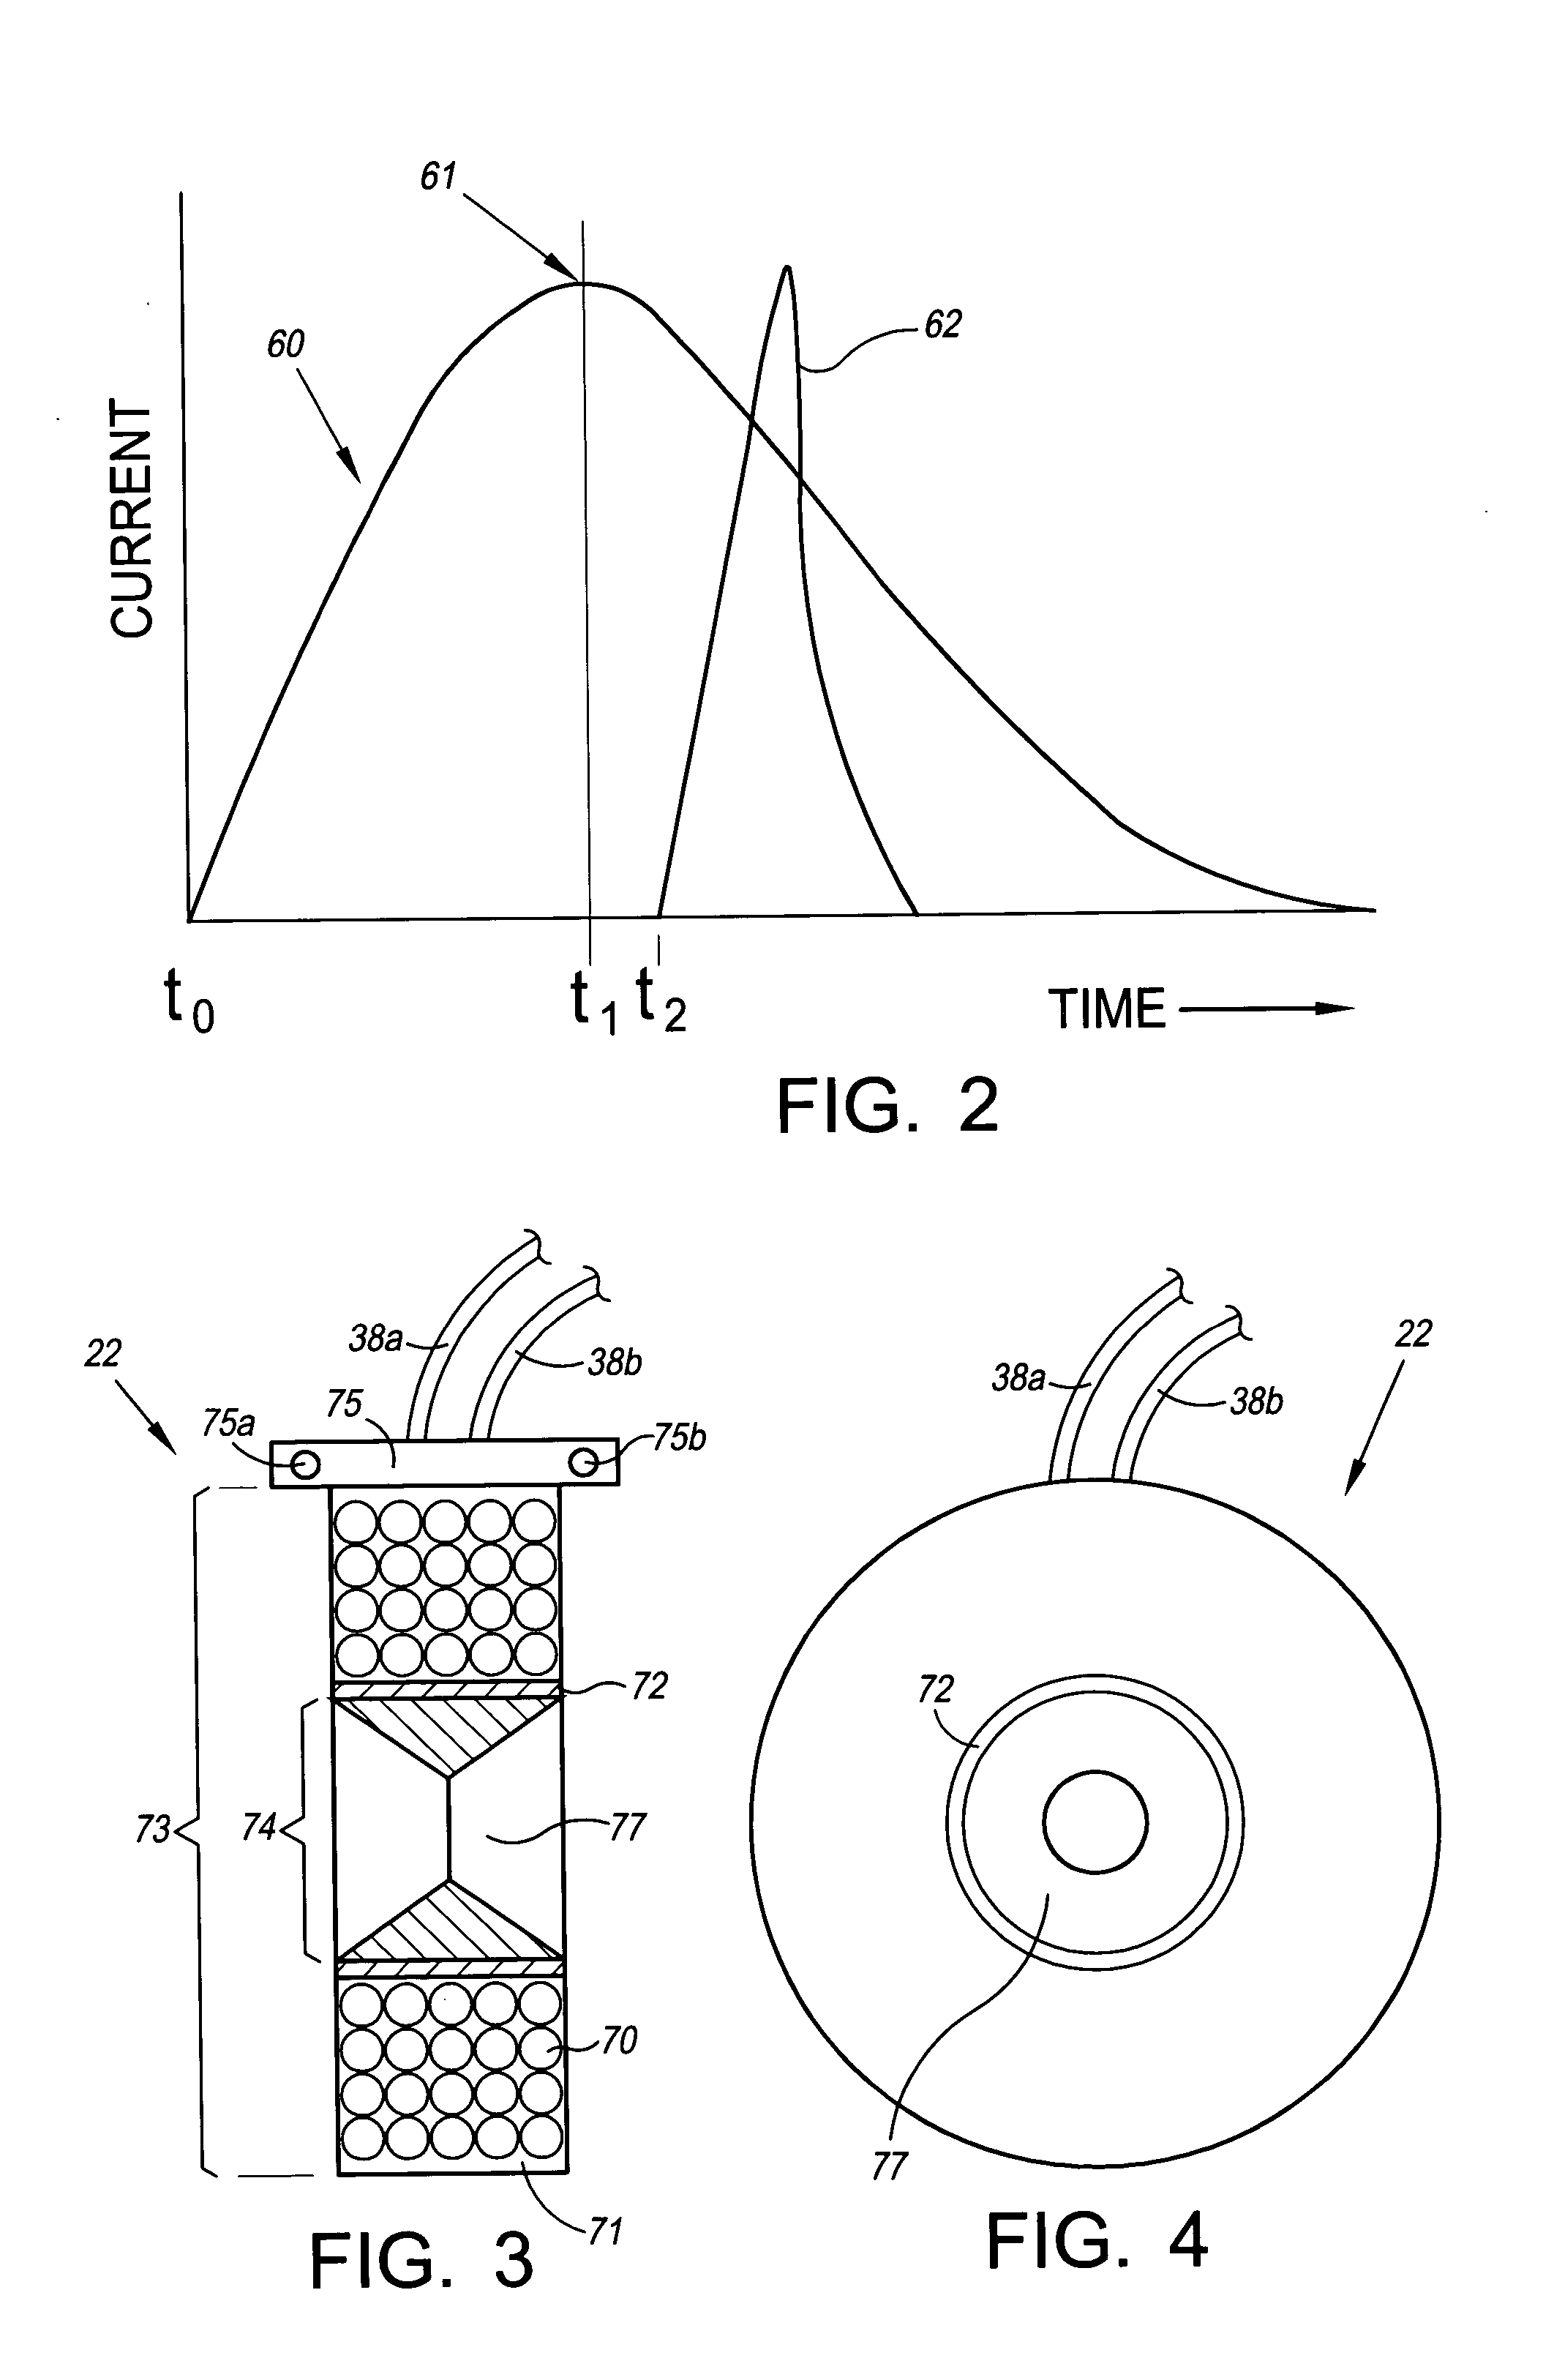 Nanopowder synthesis using pulsed arc discharge and applied magnetic field